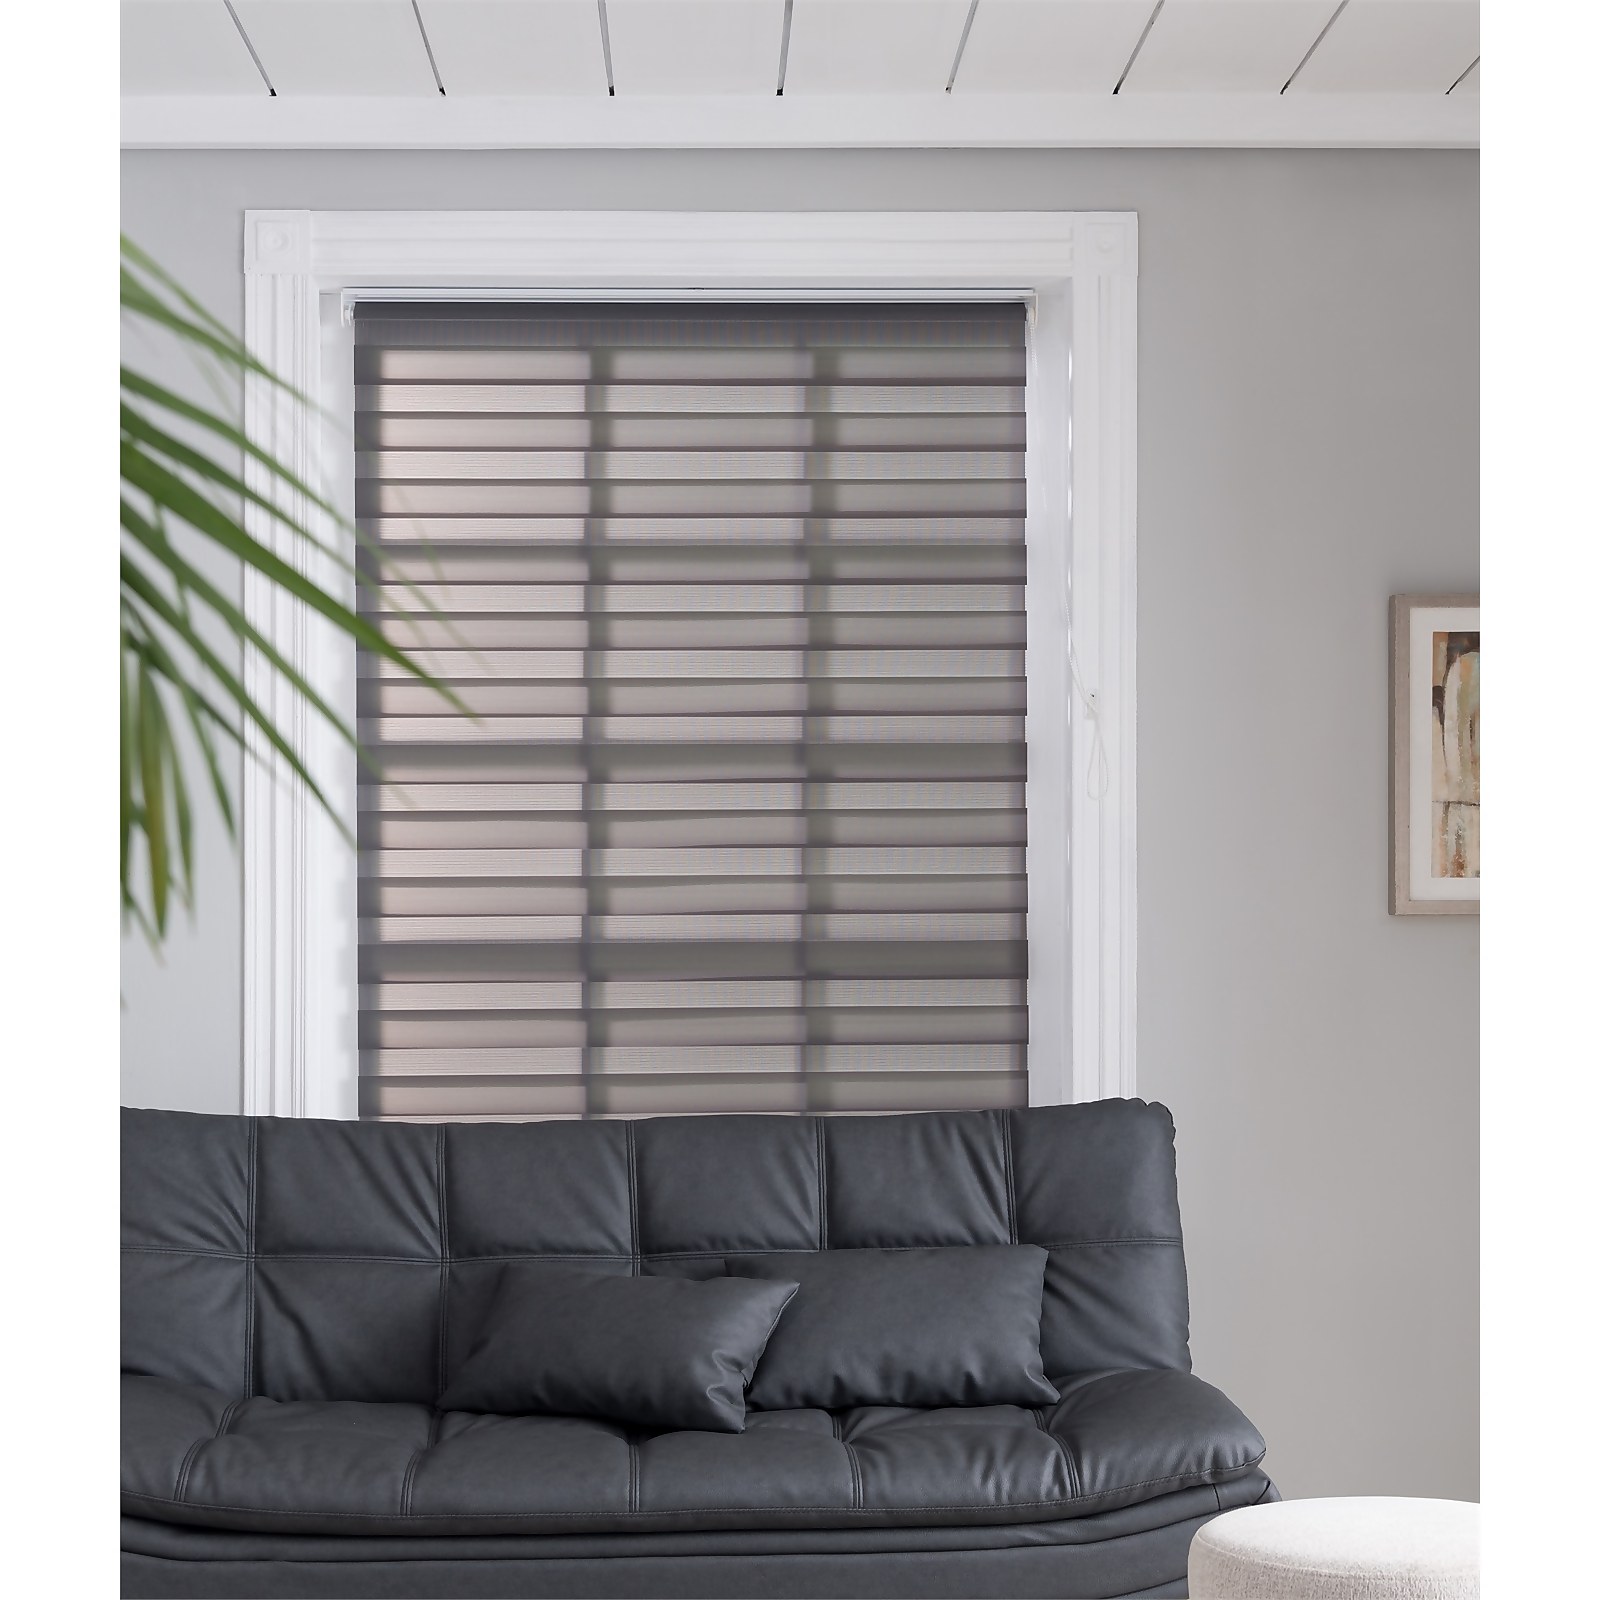 Photo of Night & Day Roller Blind - Dove Grey - 110x160cm